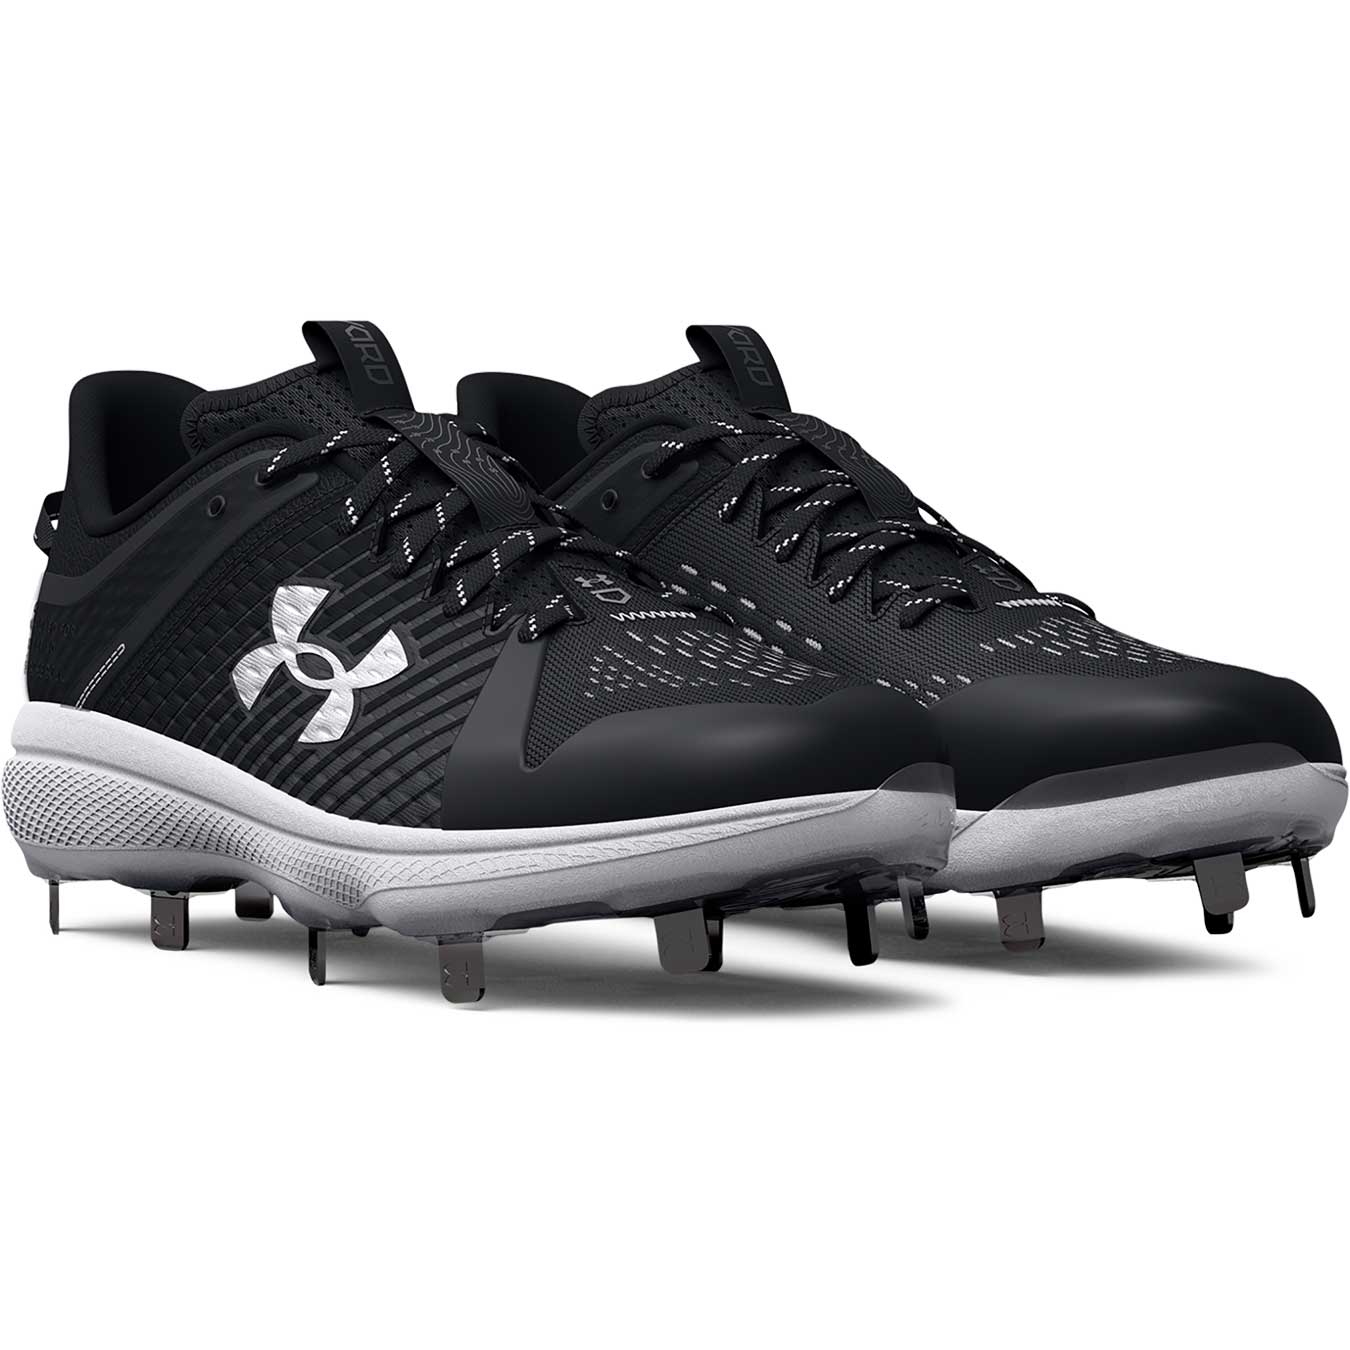 Under Armour Yard Low MT Metal Cleats